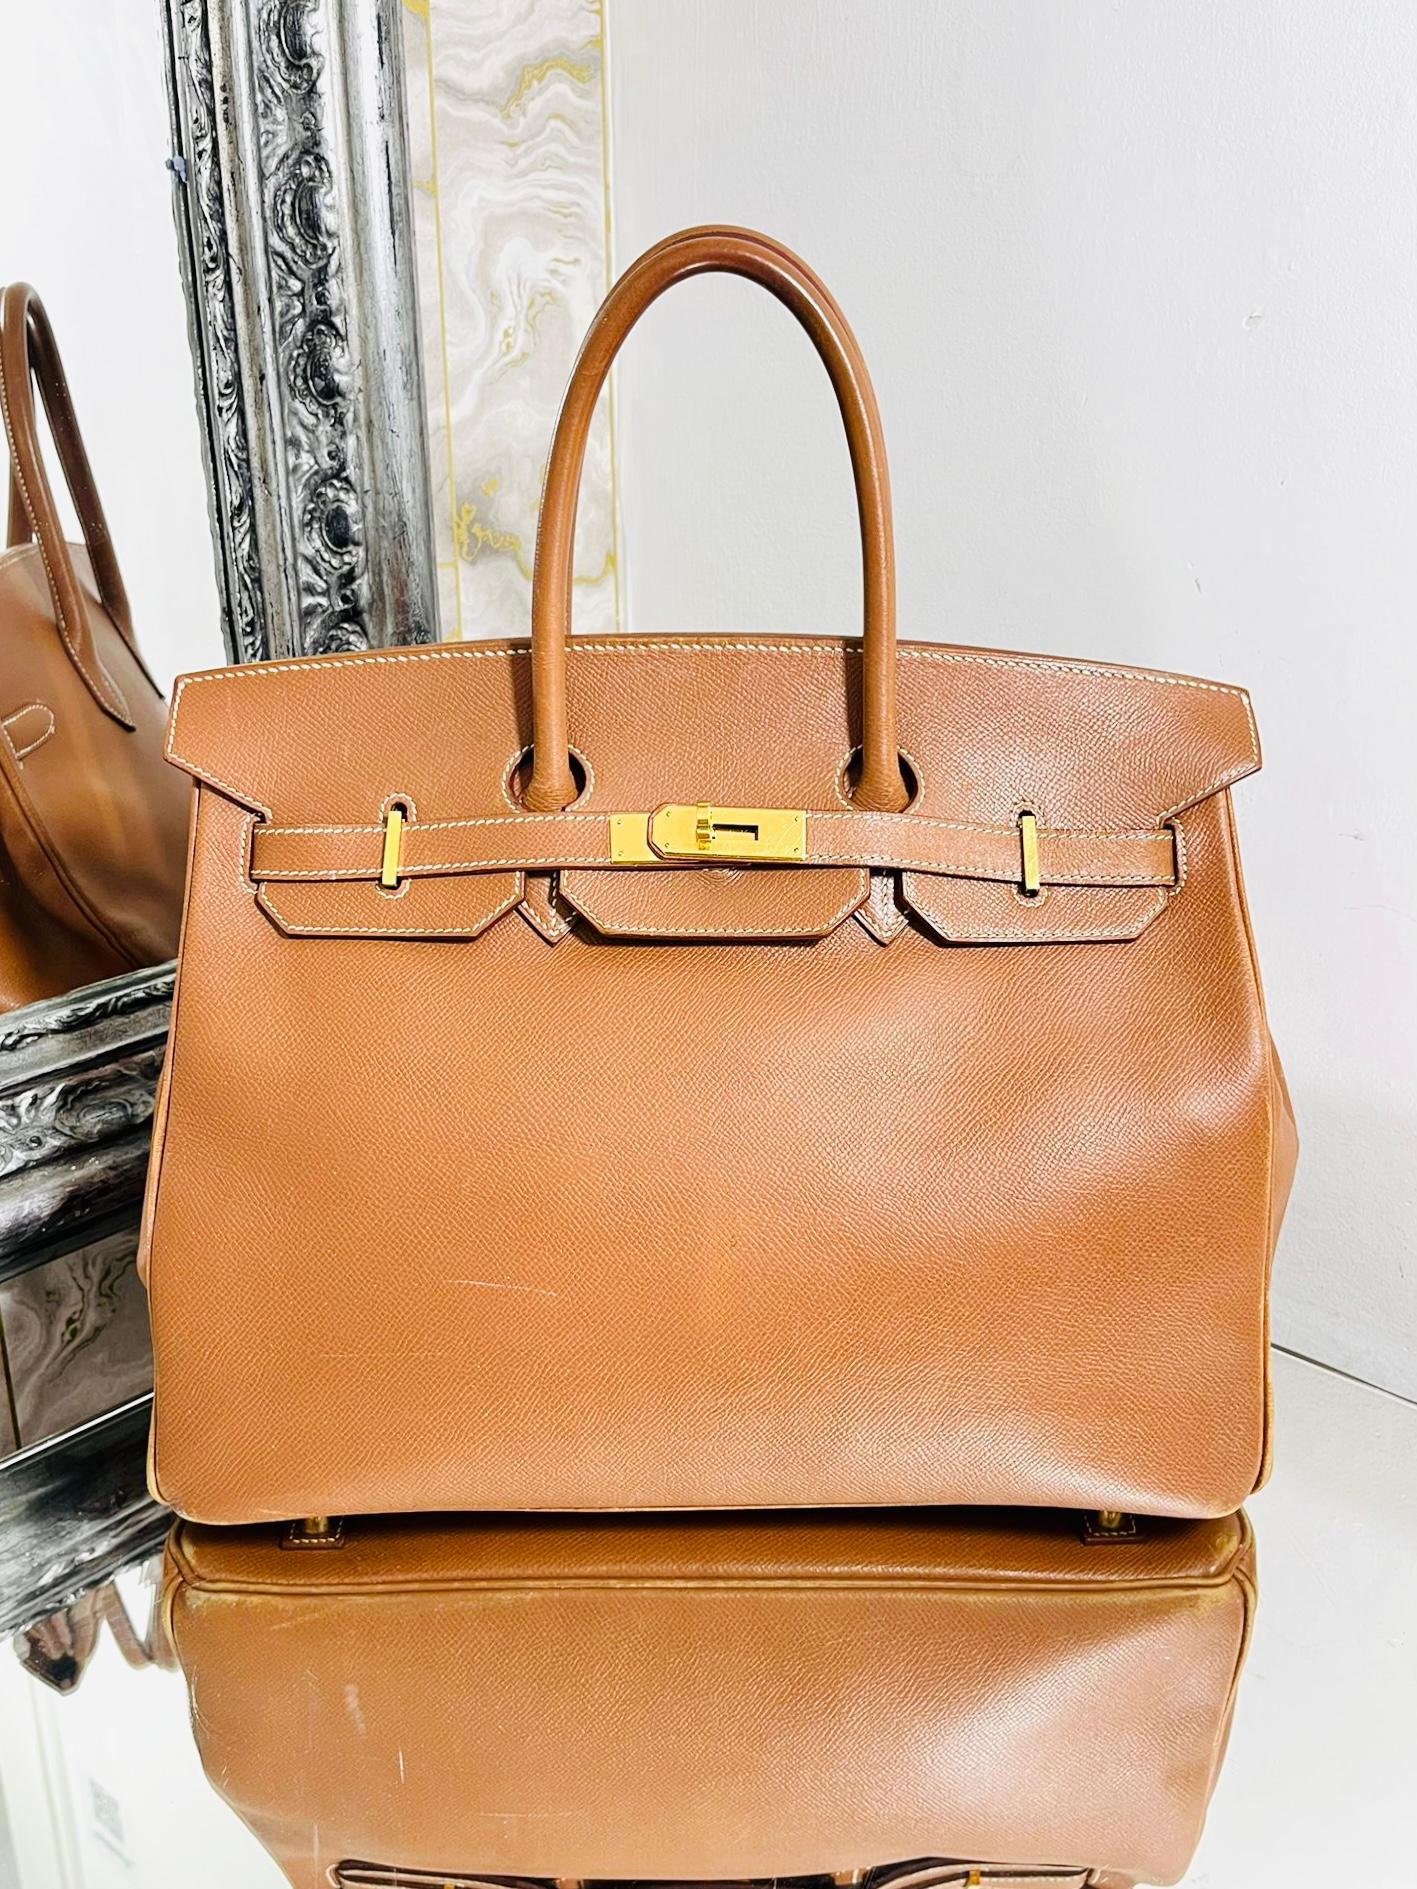 Hermes Vintage Leather Birkin 35

From 19881 in  Courcheval leather and brand colour Gold with gold plated hardware. 

Twist lock closure and rolled leather carry handles.

Size - Height 28cm, Width 35cm, Depth 18cm

Condition - Vintage - Fair (